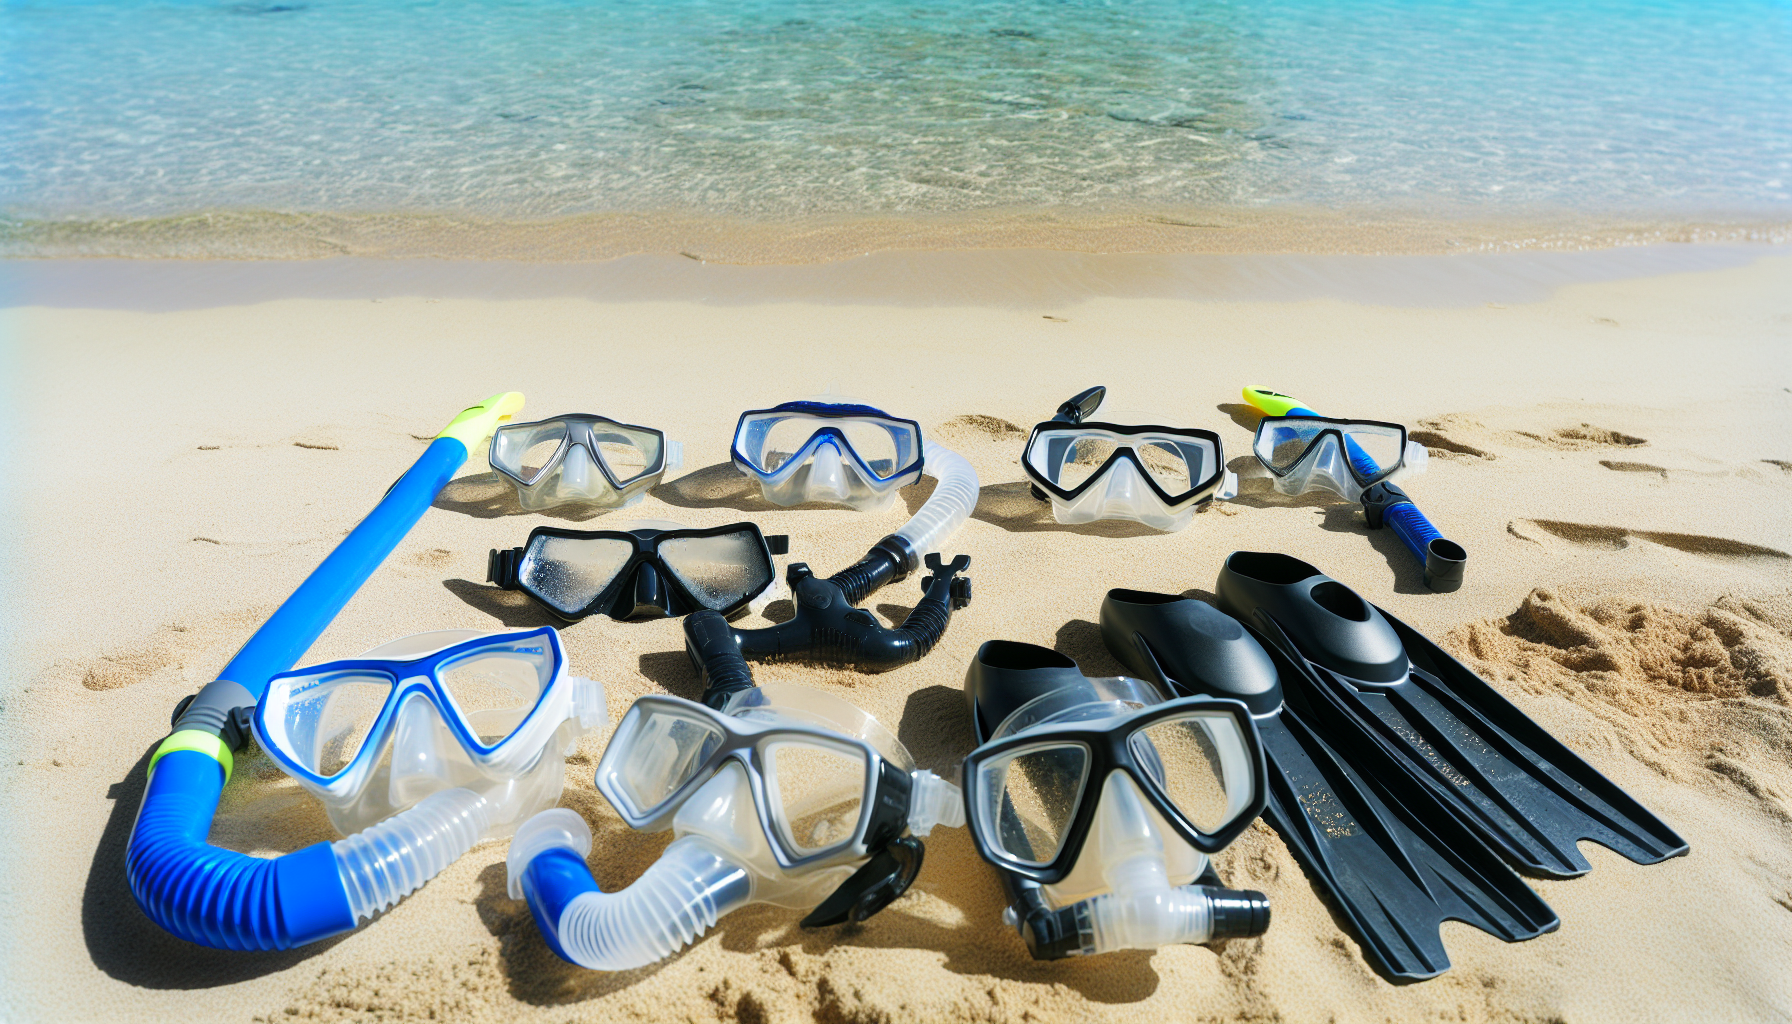 Snorkeling gear including masks, snorkels, and flippers